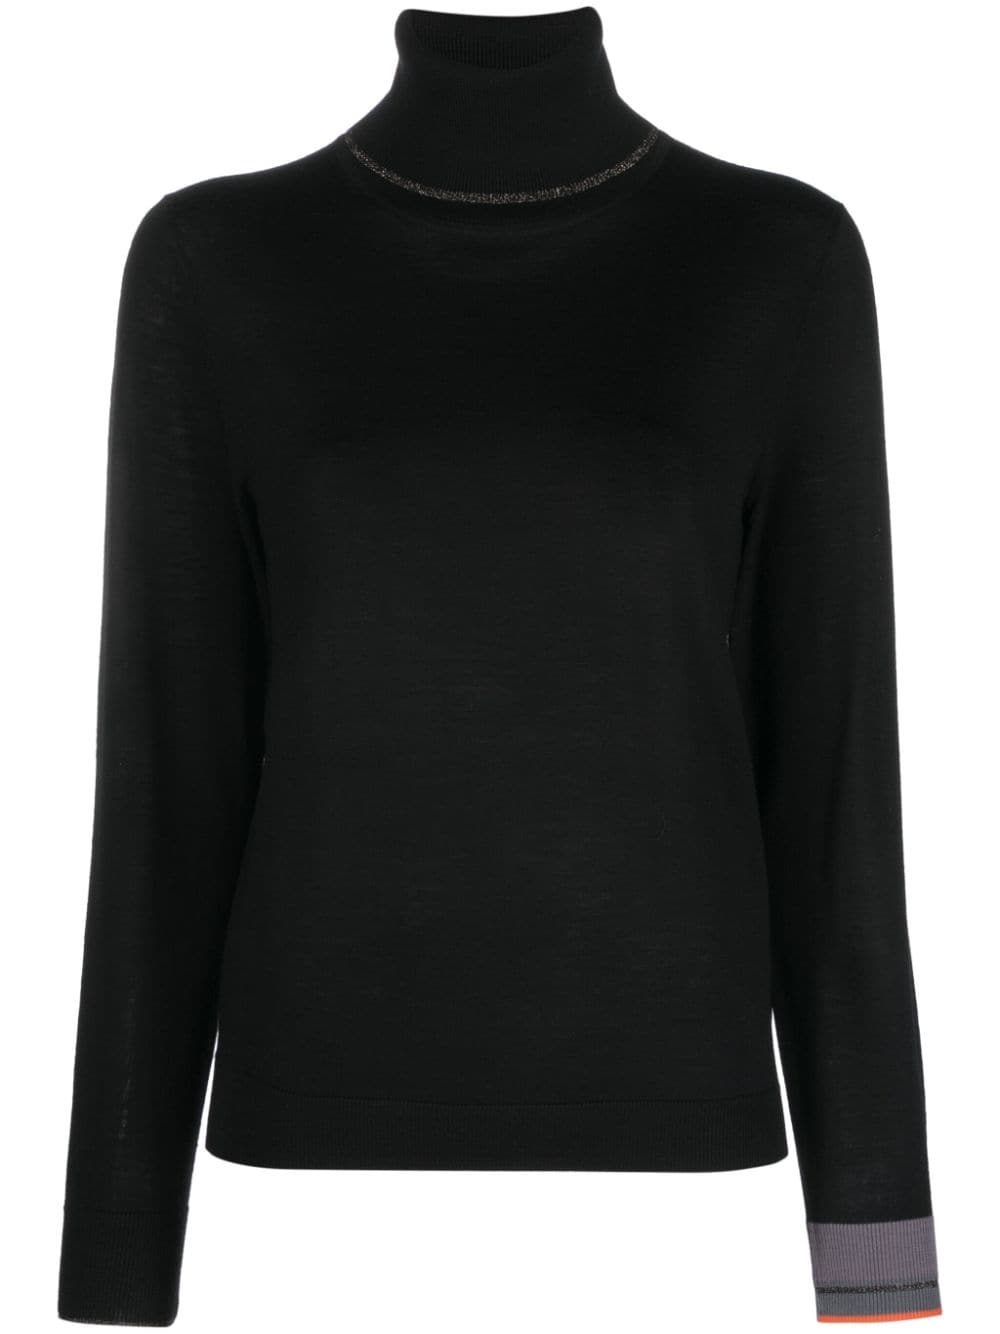 PS BY PAUL SMITH KNITTE ROLL NECK SWEATER